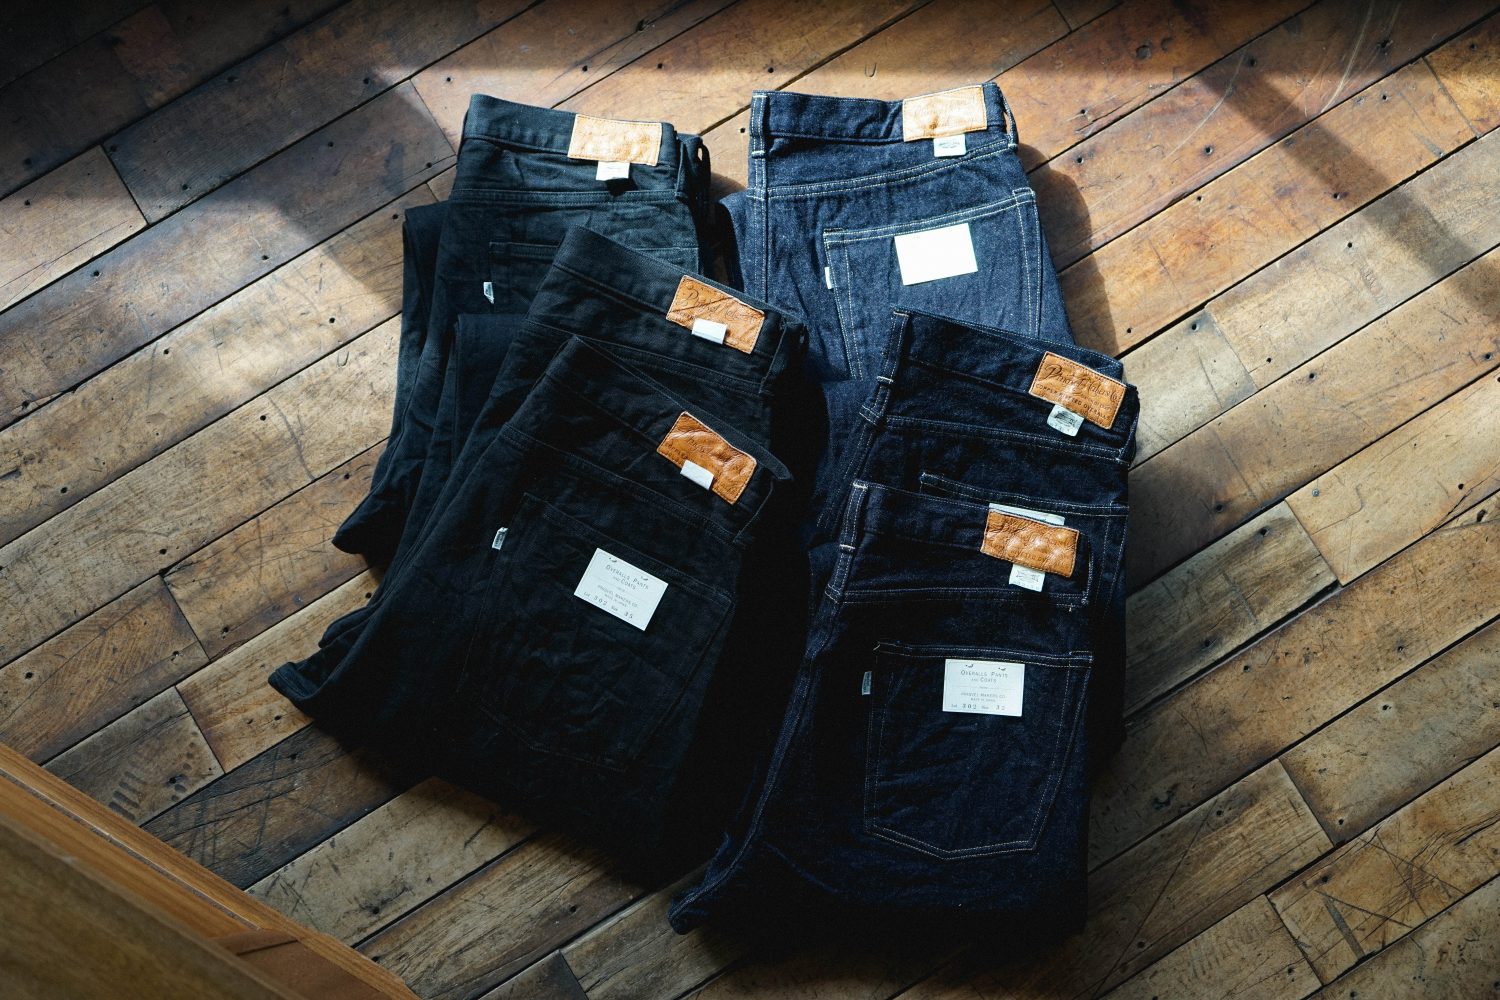 Permanent Products “Classic Jeans Series”